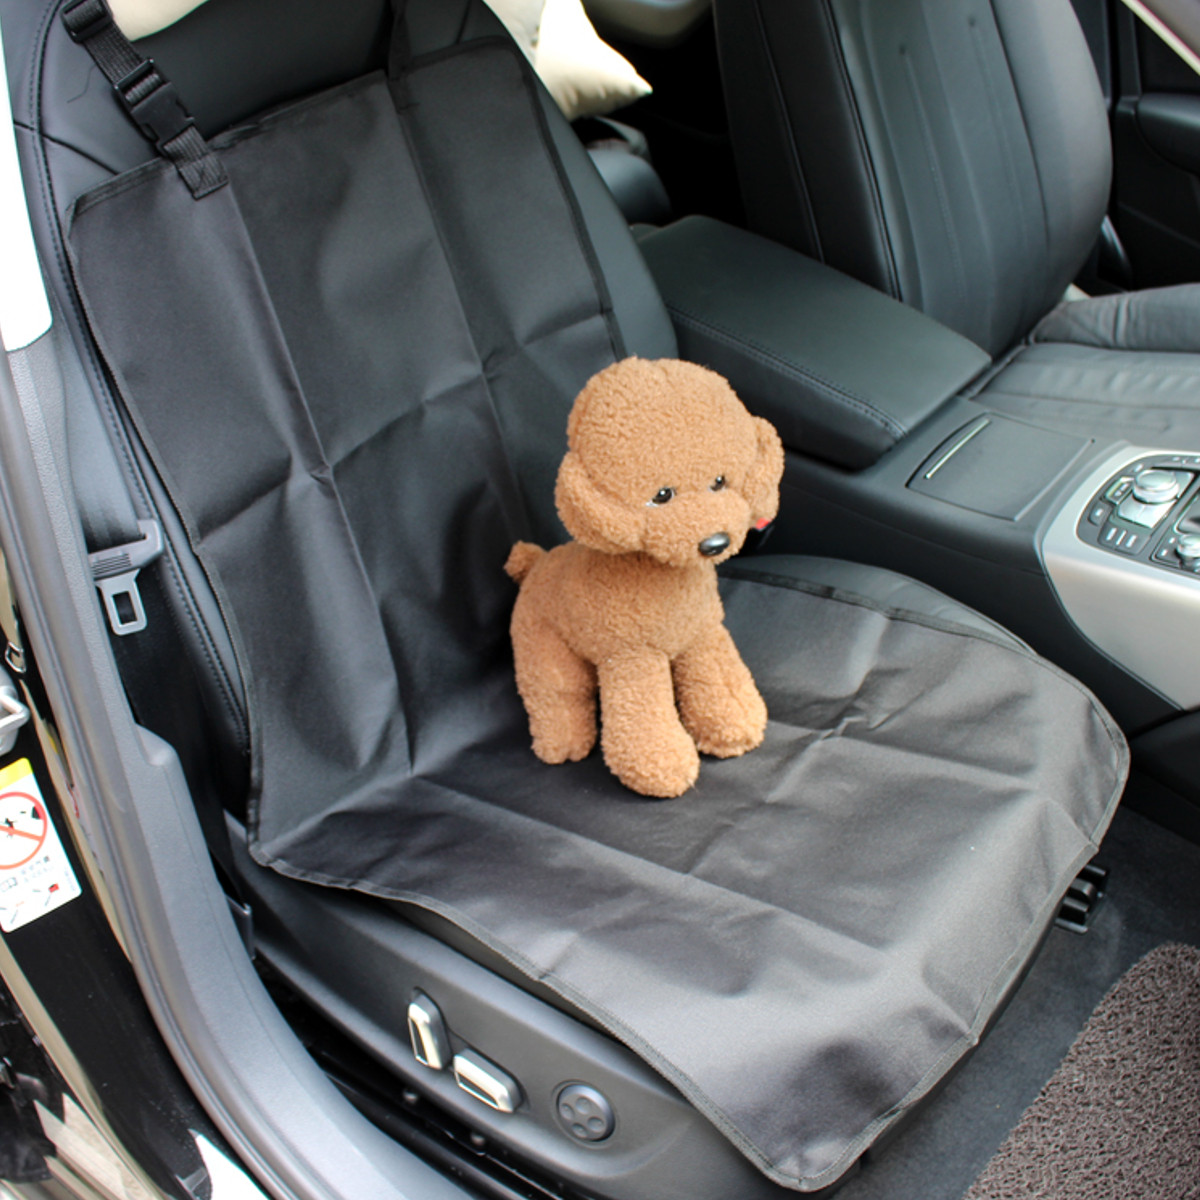 Waterproof-Oxford-Pet-Dog-Cat-Car-Front-Seat-Cover-Protector-Mat-Blanket-Travel-1157525